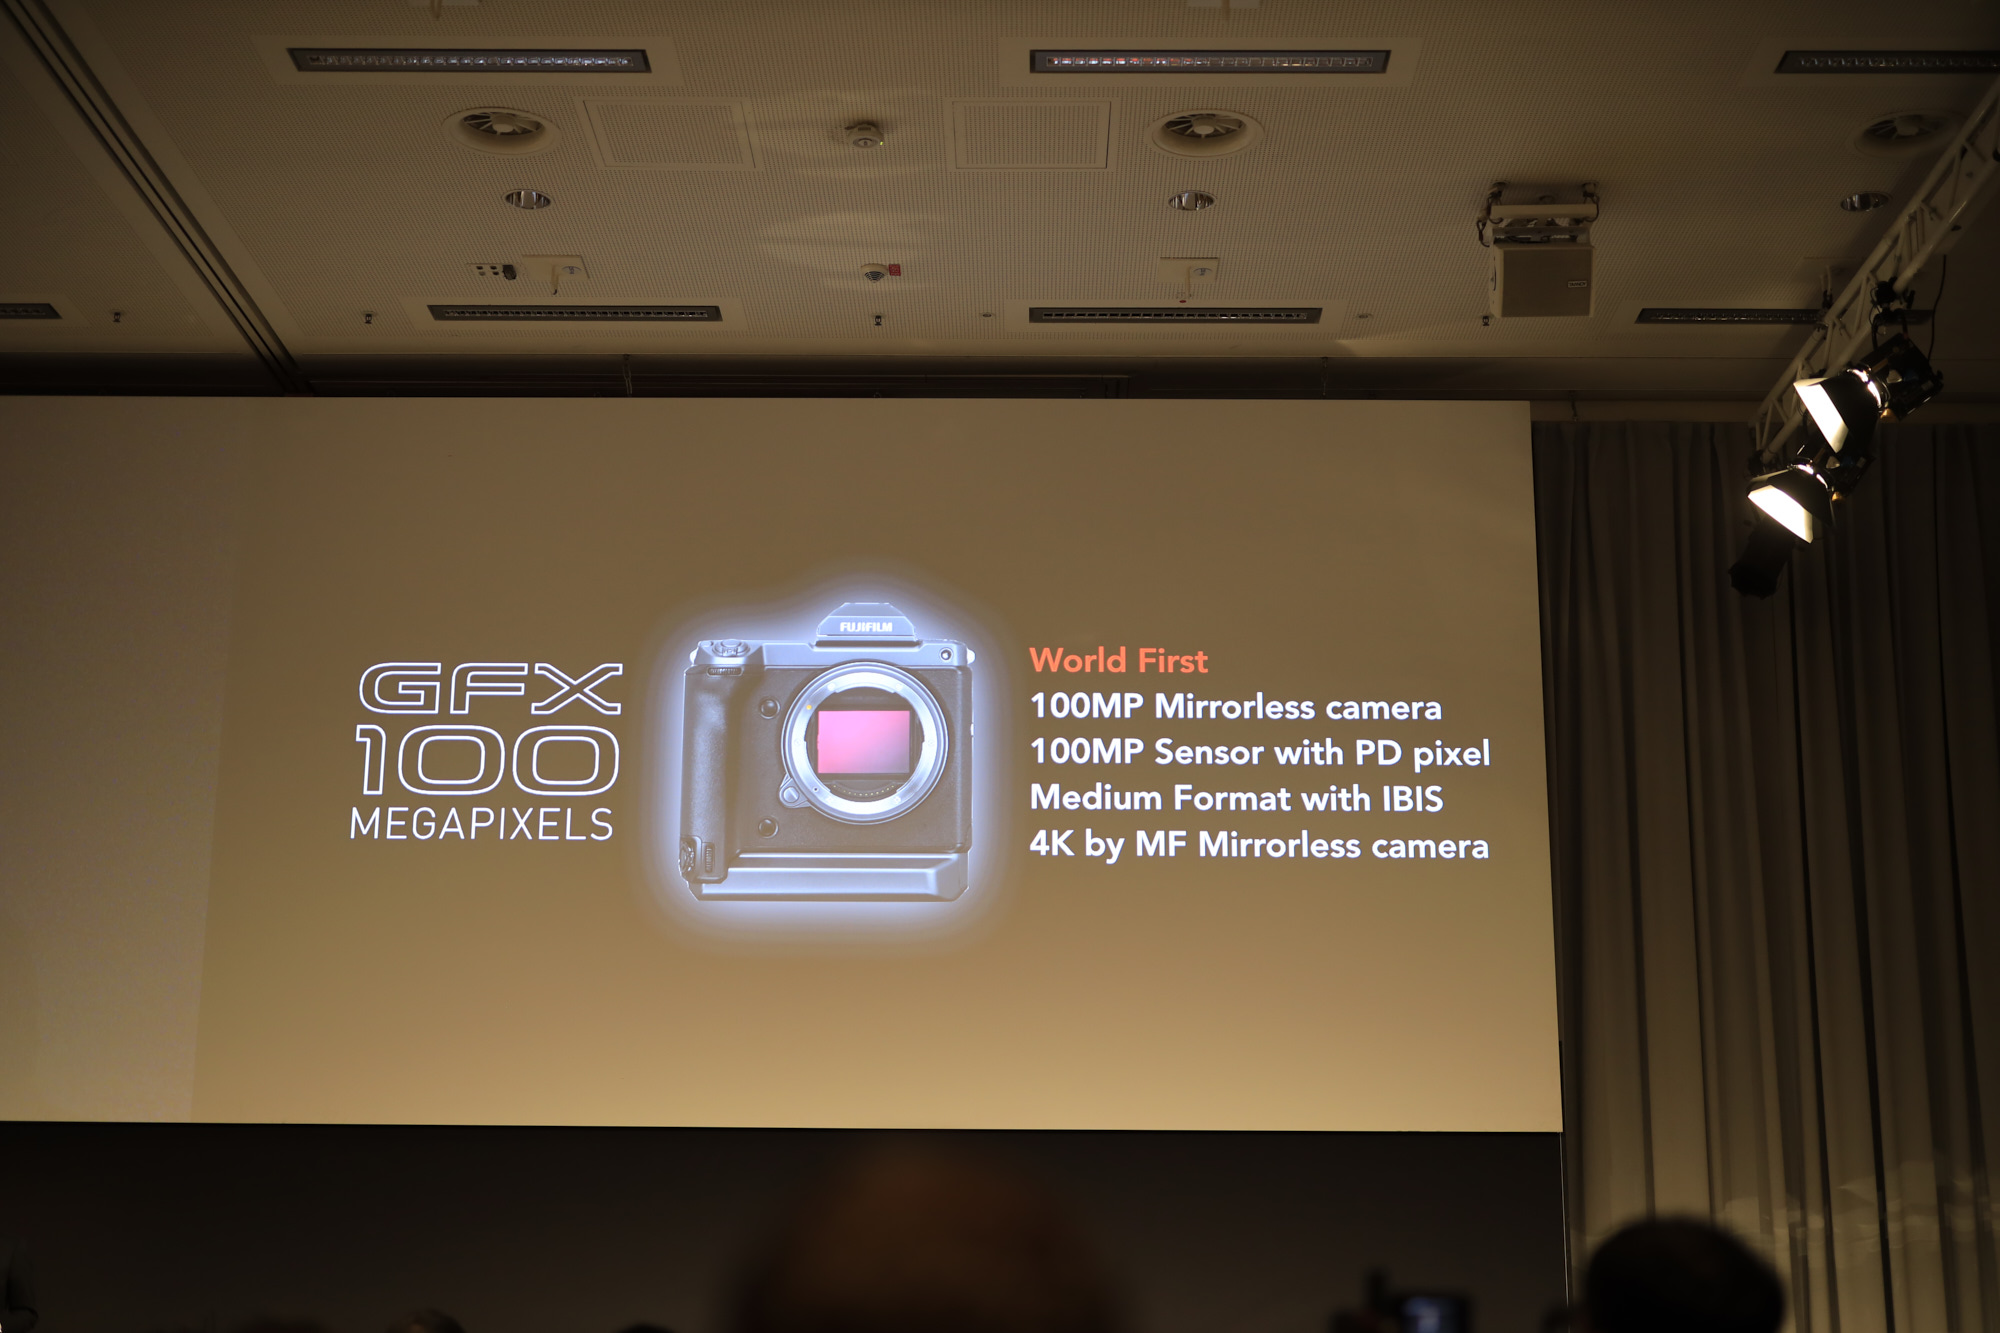 Fujifilm is Developing a 100MP GFX Camera with IBIS and Phase Detection